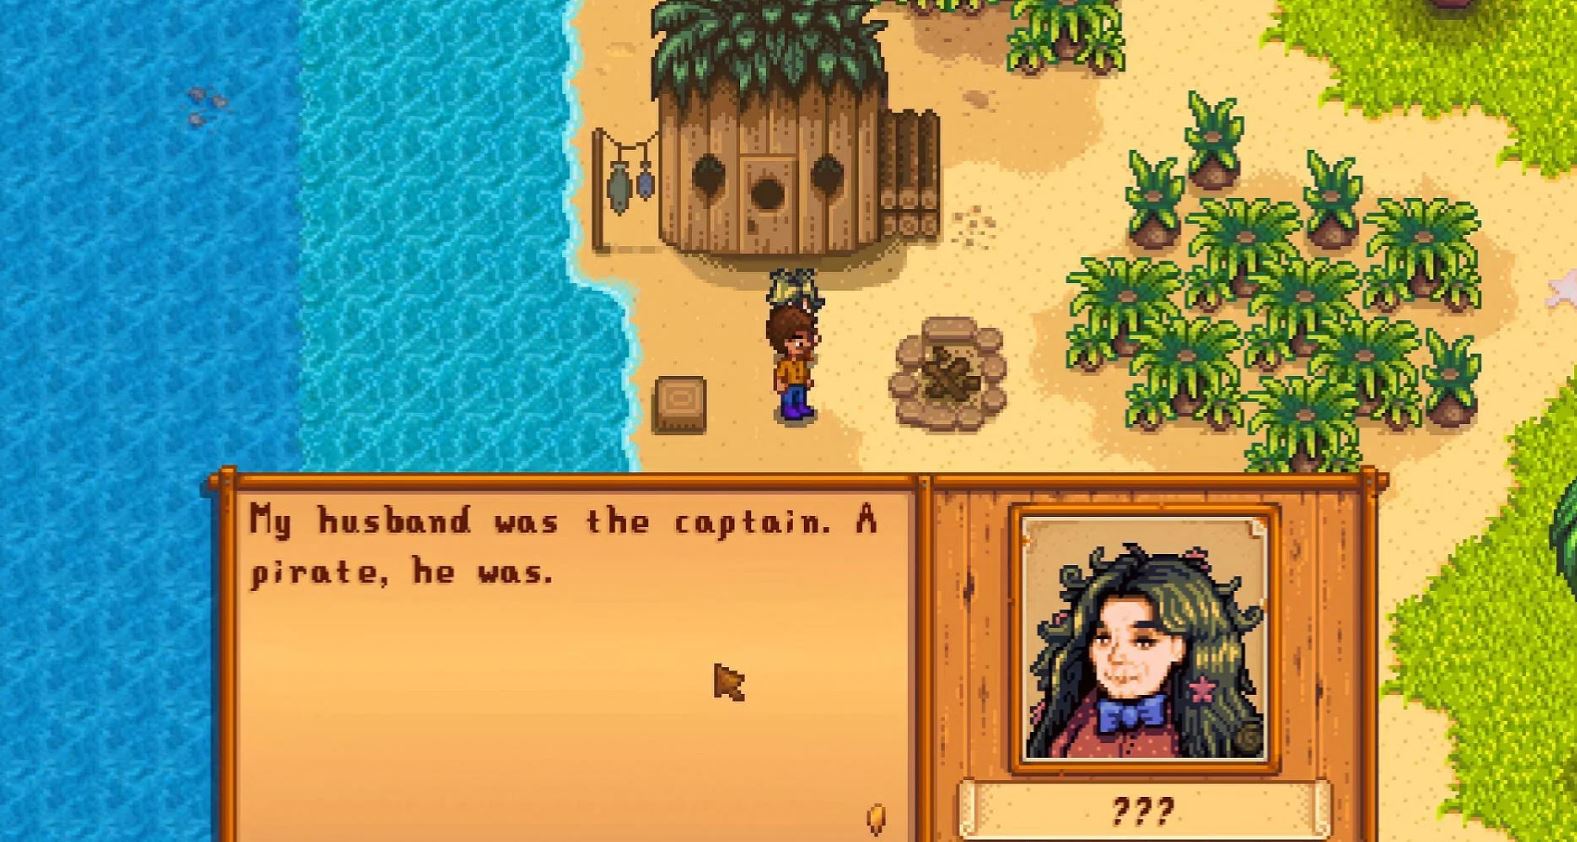 Stardew Valley Pirate’s Wife Quest